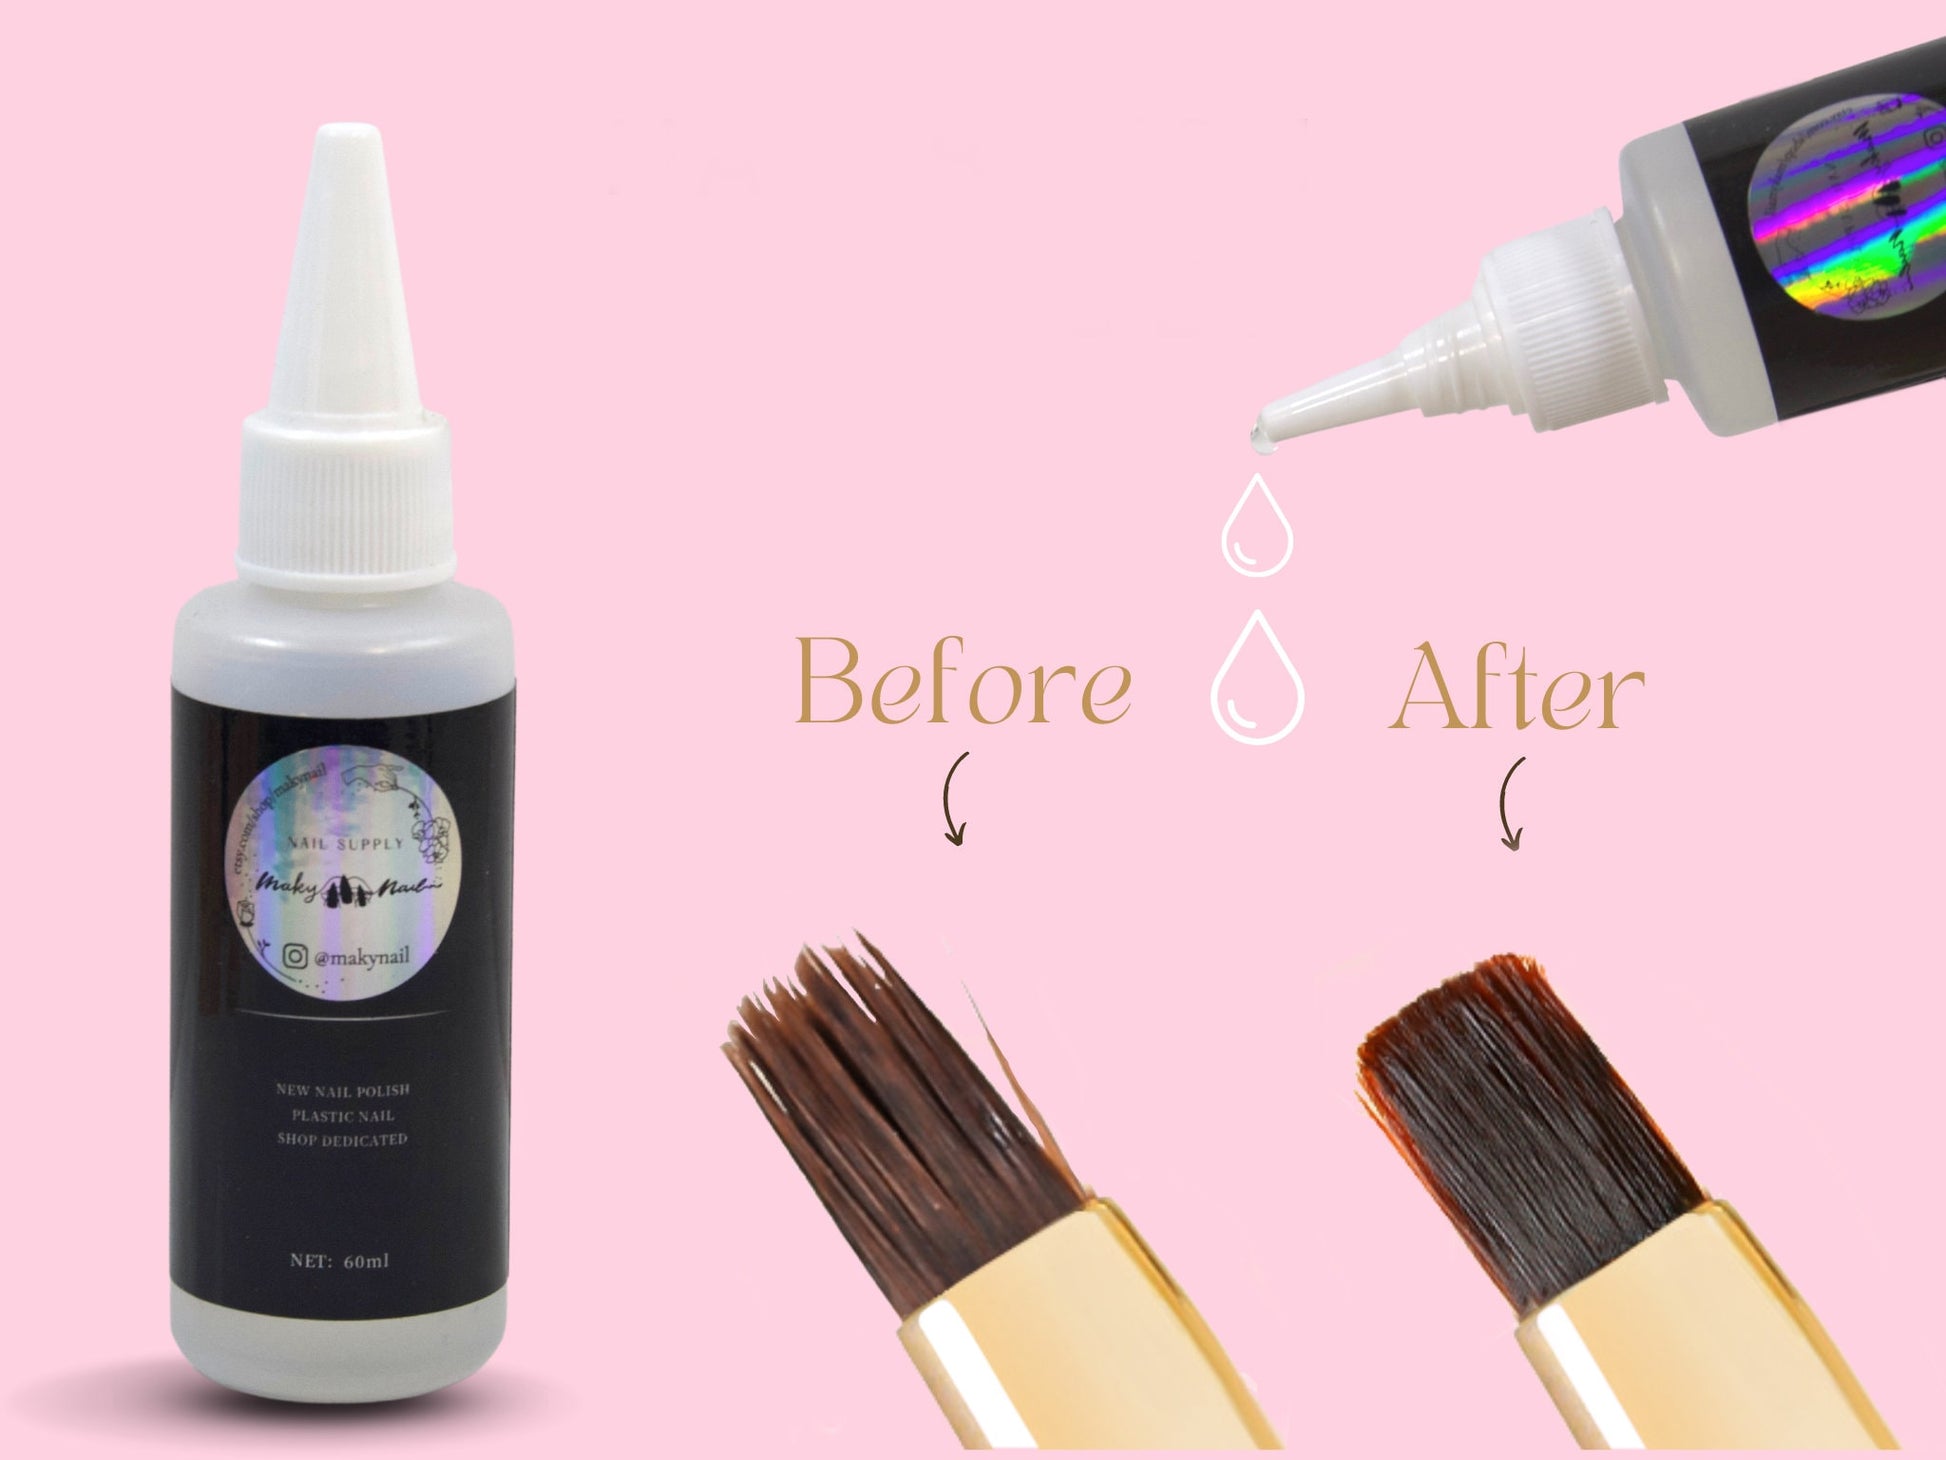 60ml Nail Brush cleaner jelly gel/ Brushes cleanser solution Preserver Restorer/ Repair Wash hardened acrylic and gel/ Odorless conditioning